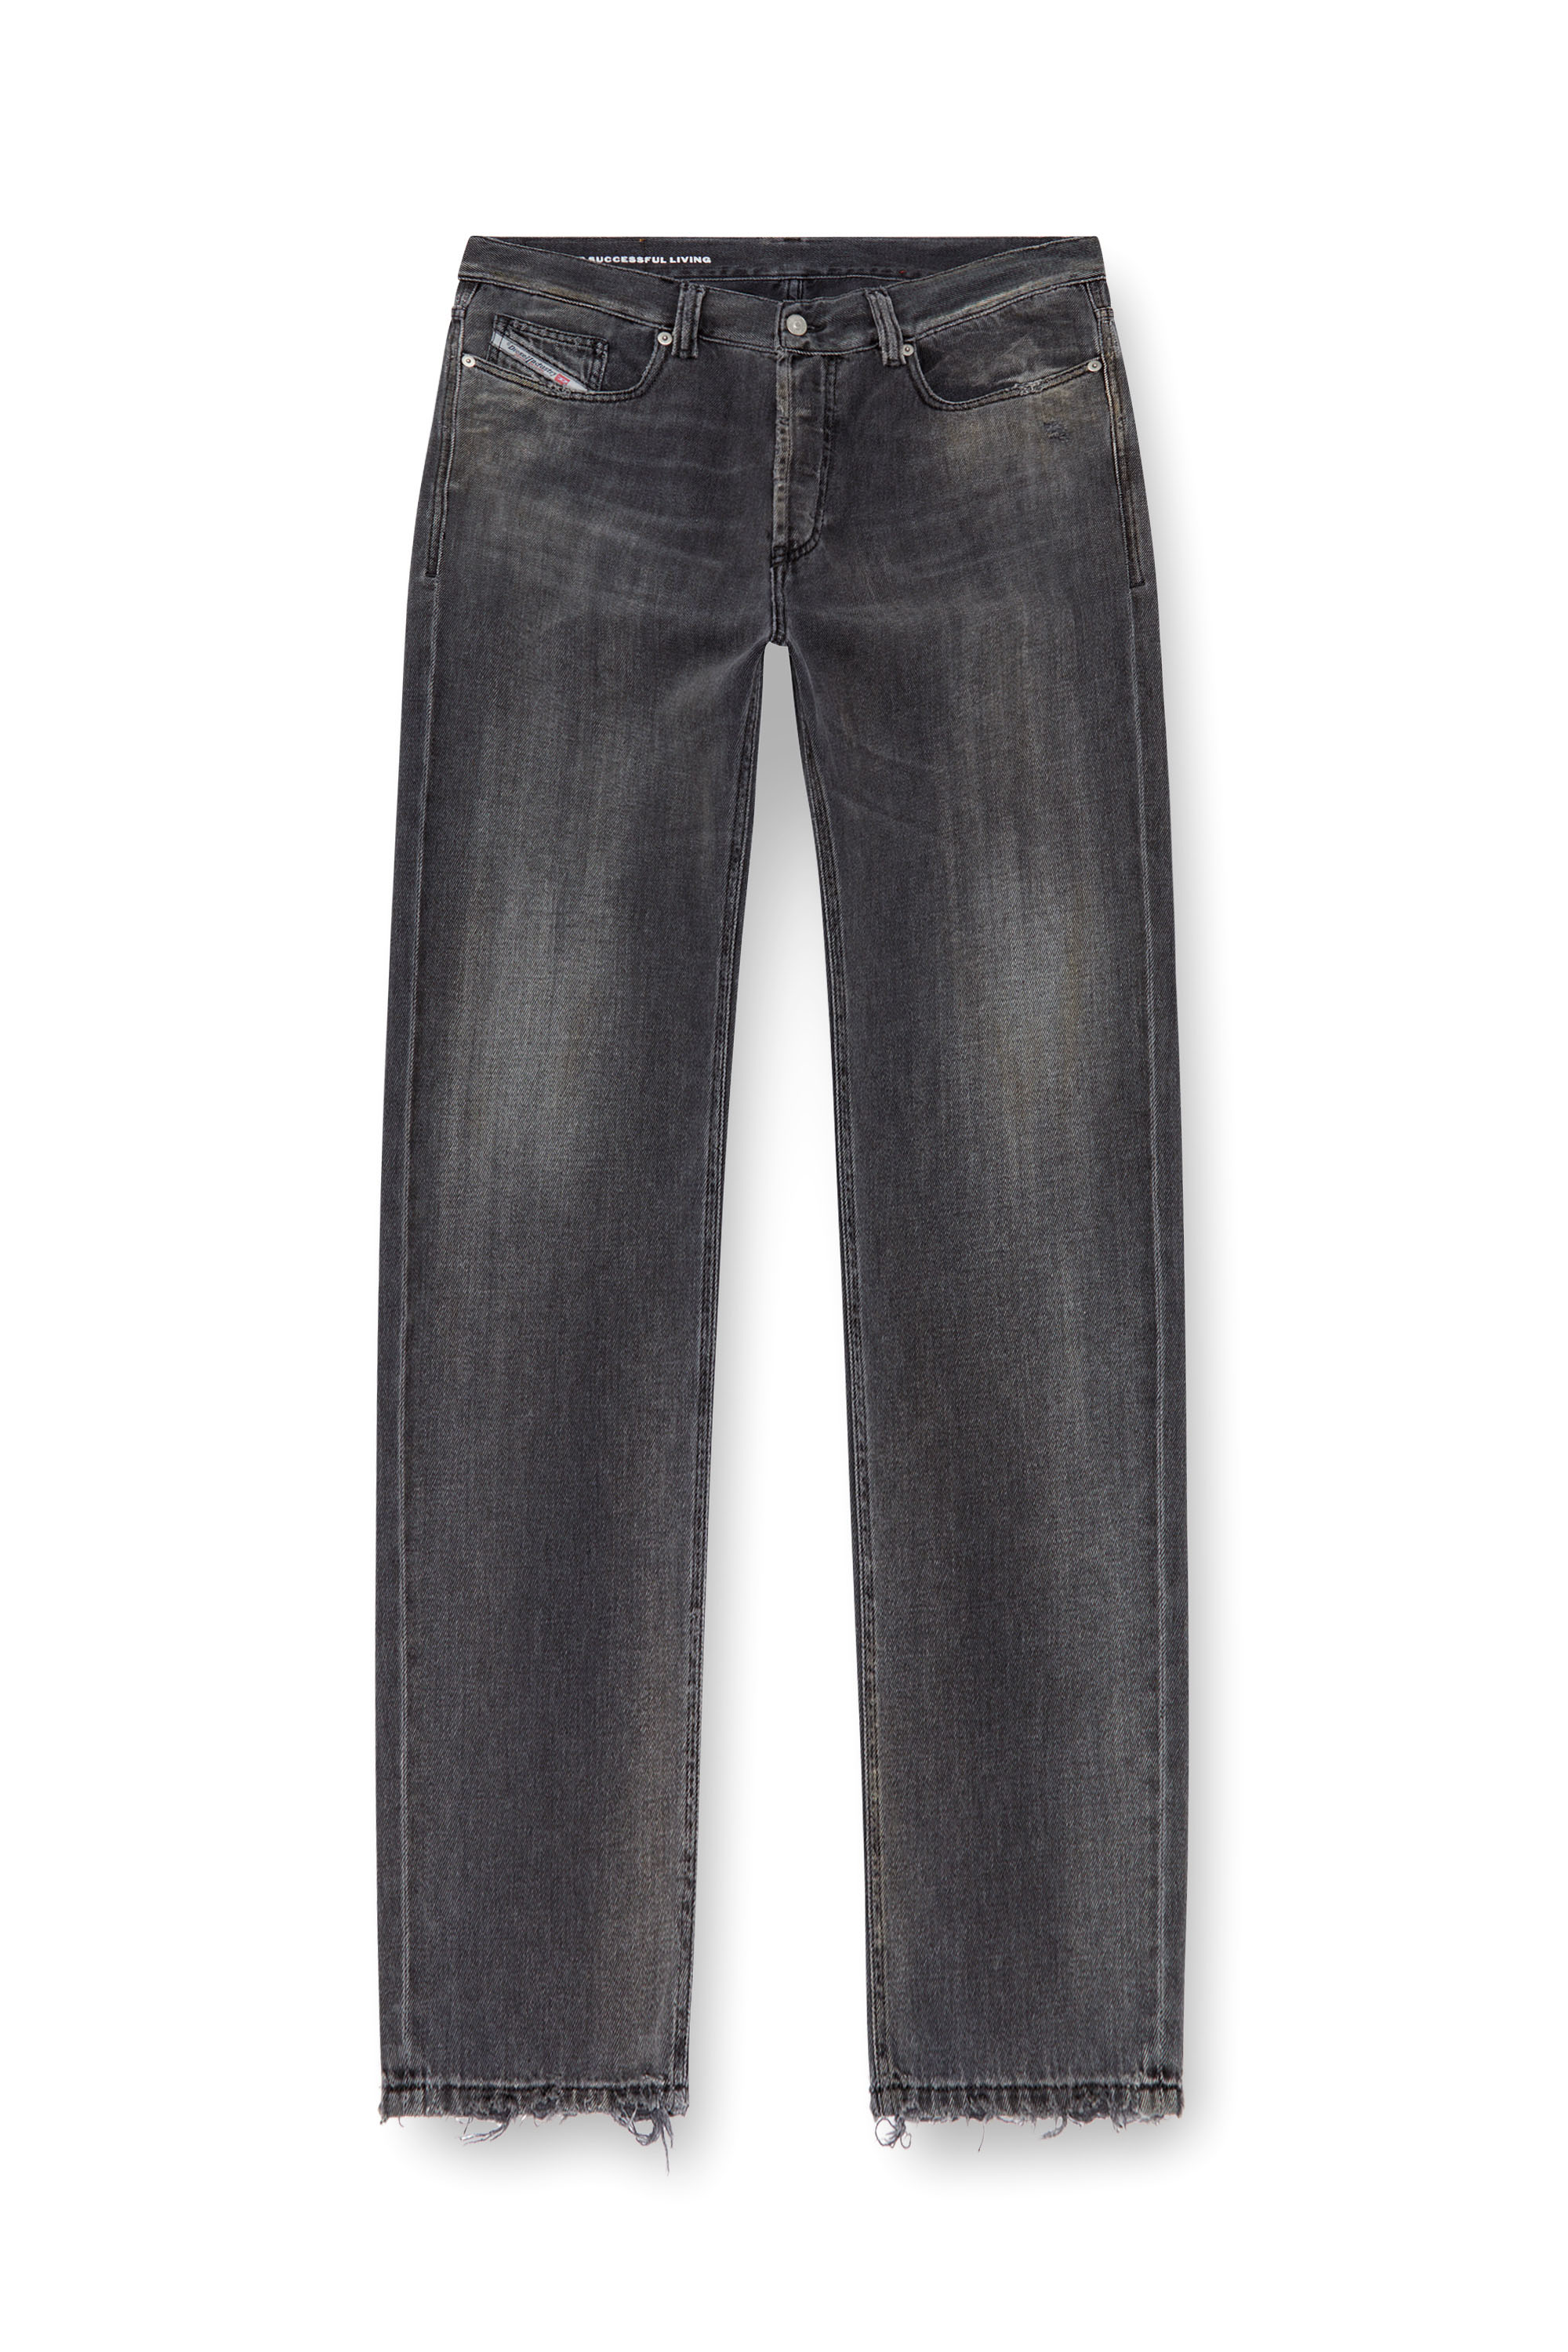 Diesel - Straight Jeans 2010 D-Macs 09K14, Hombre Straight Jeans - 2010 D-Macs in Negro - Image 3